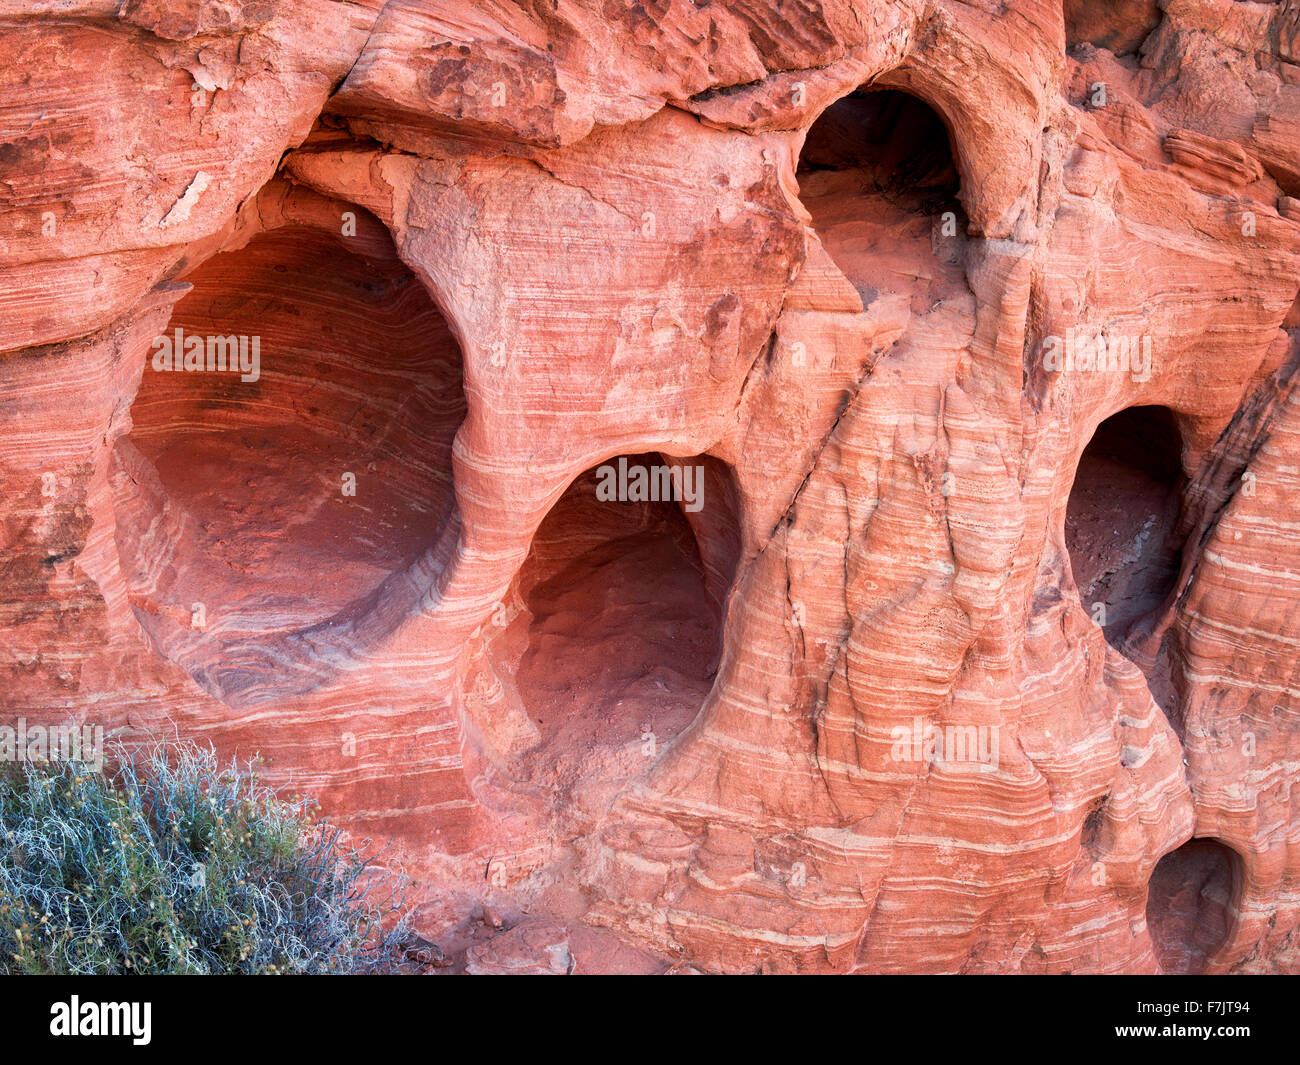 Eroded holes in sandstone. Valley of Fire State Park, Nevada Stock Photo